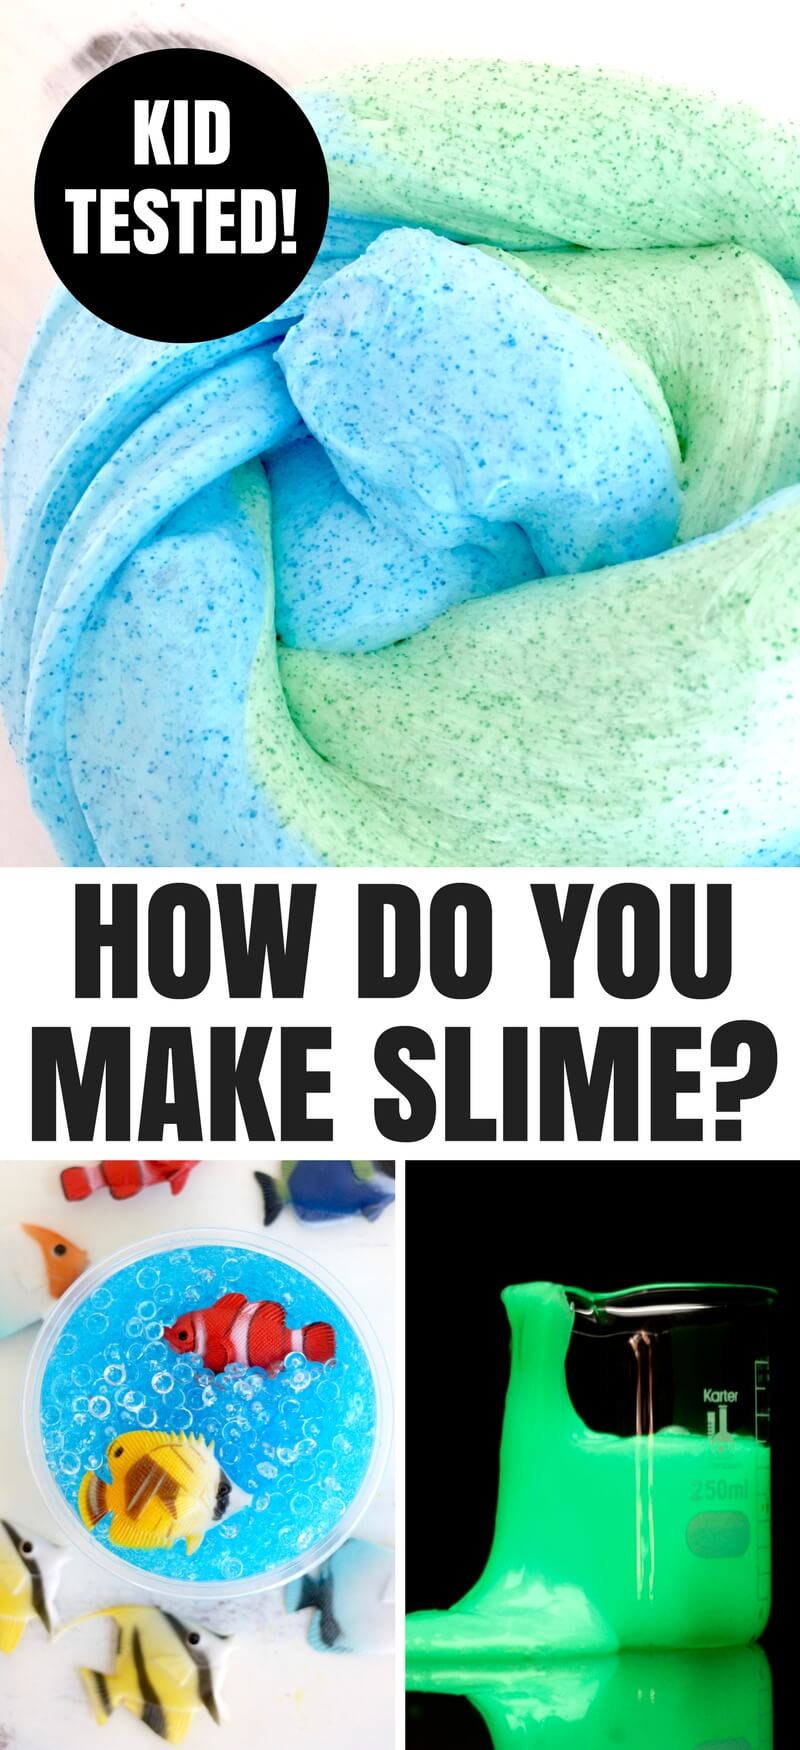 Here's a question I am messaged or emailed about all the time. How do you make slime? What are the best slime recipes? I have been working hard experimenting with cool slime recipes, fun mix-ins, and tinkering with just the right measurements. I believe we have some of the best, easy, homemade slime recipes around to share with you!